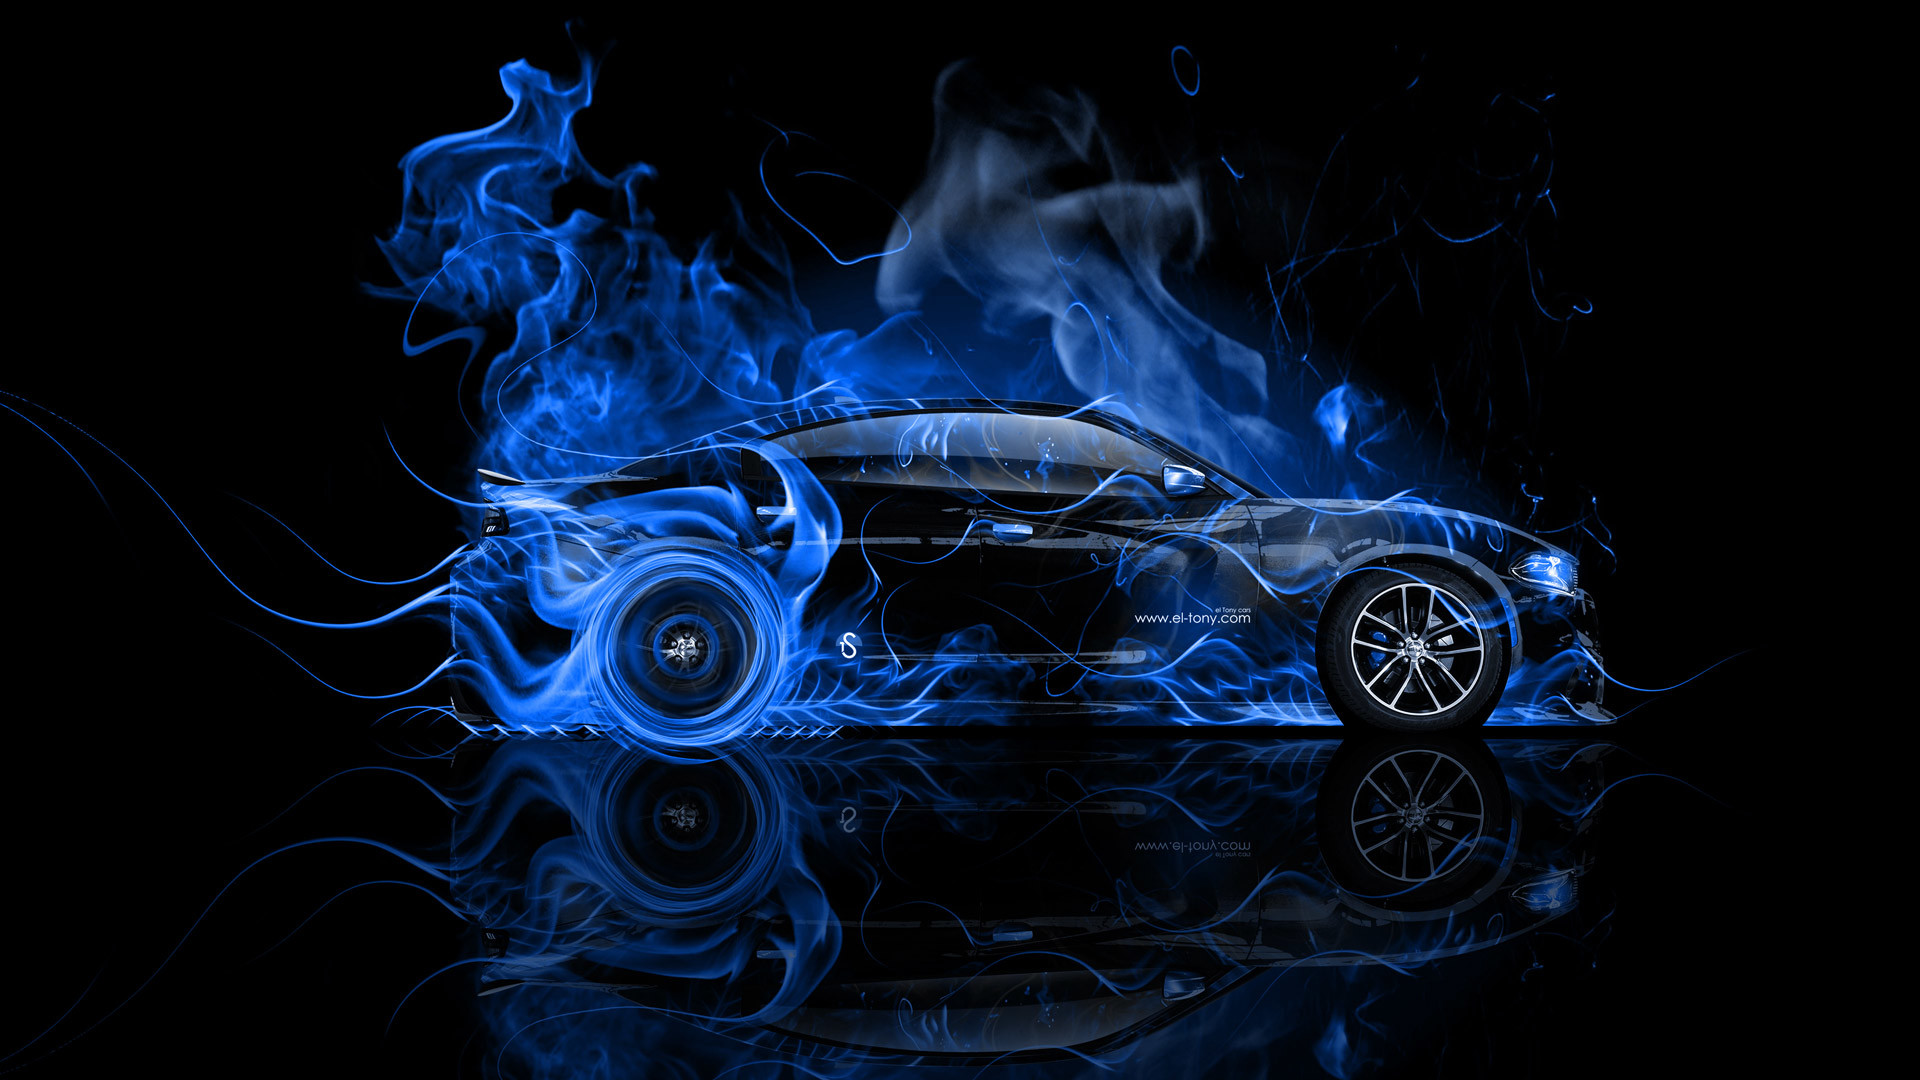 Dodge Charger RT Muscle Side Blue Fire Abstract Car 2014 Art HD Wallpapers design by Tony Kokhan www.el tony.com 19201080 Dodge Chargers